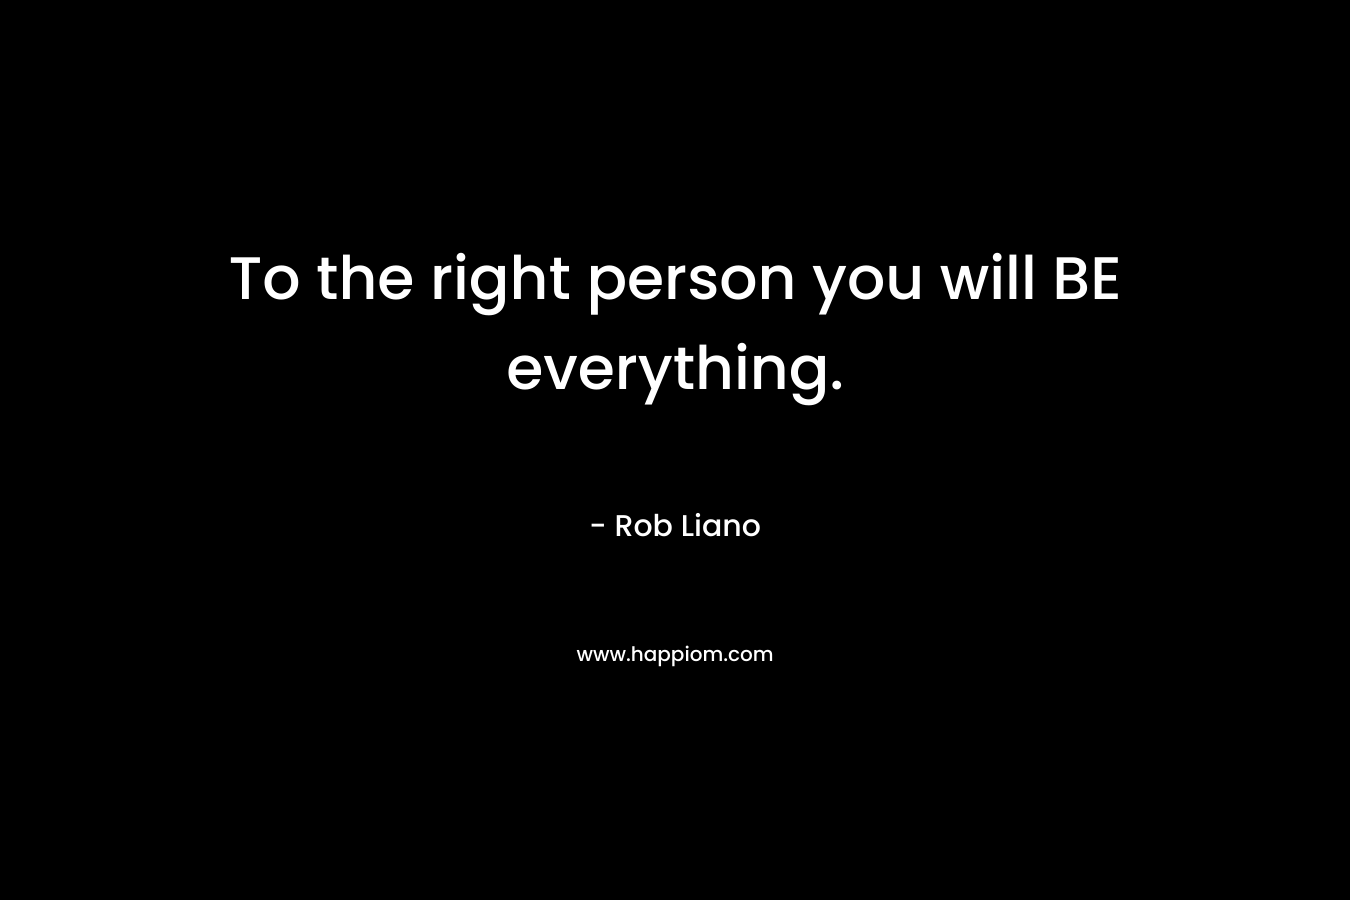 To the right person you will BE everything.